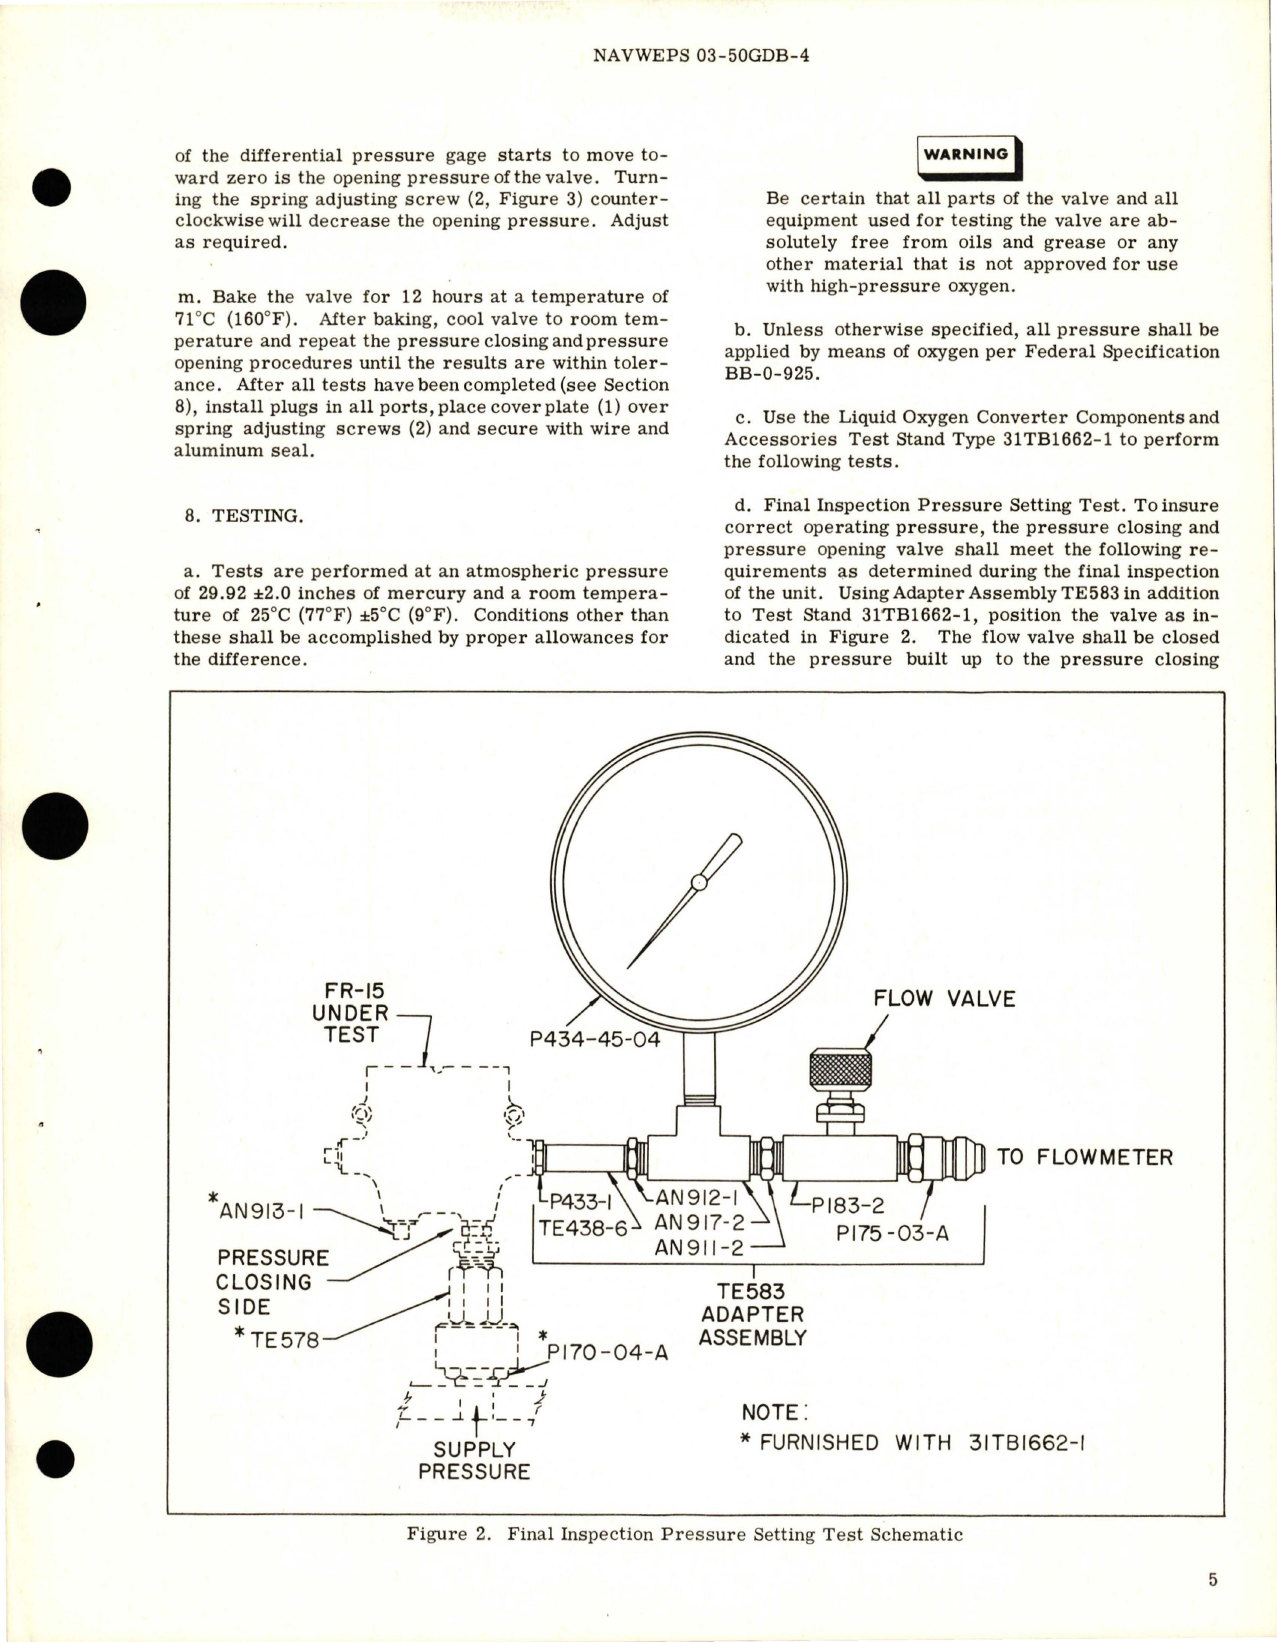 Sample page 5 from AirCorps Library document: Overhaul Instructions with Parts Breakdown for Pressure Opening and Closing Valve - Type FR-15-A1-70